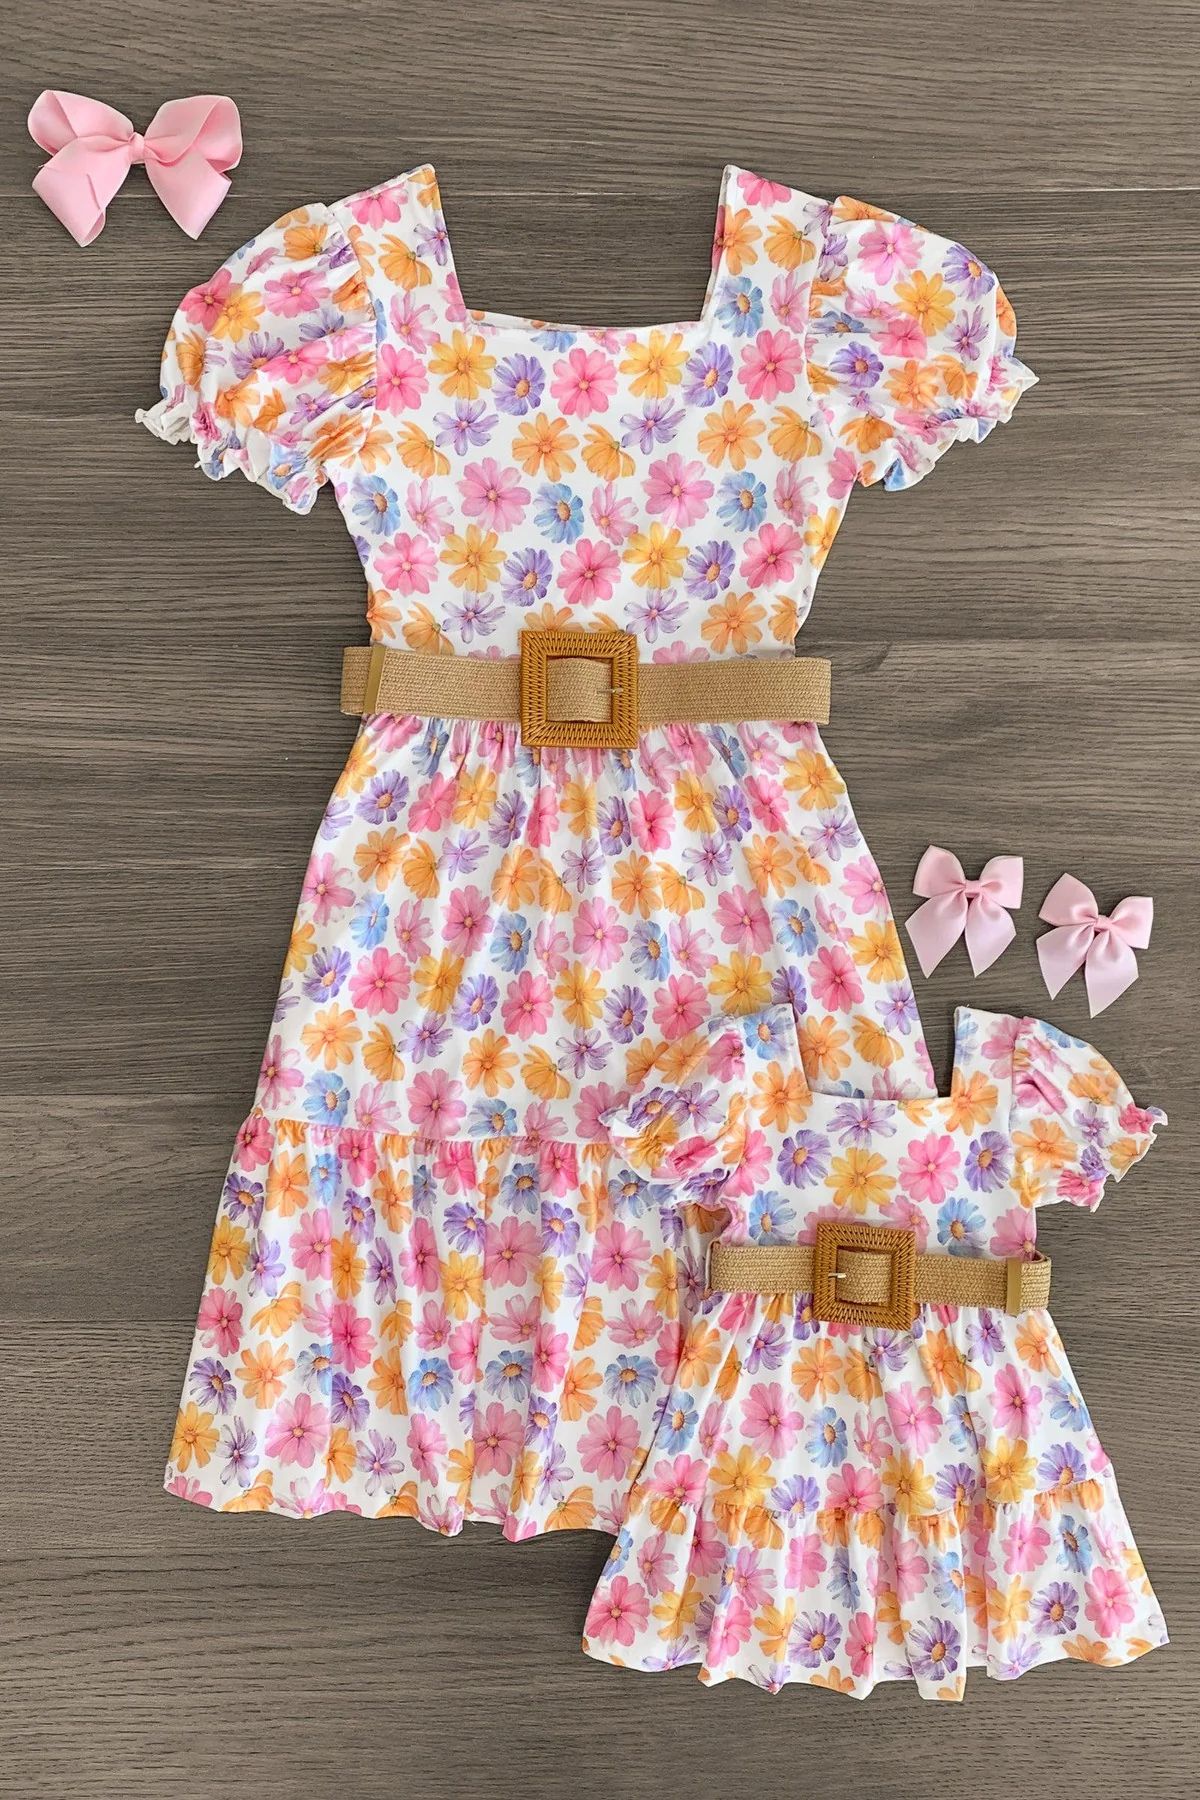 Mom & Me - Colorful Daisy Dress | Sparkle In Pink